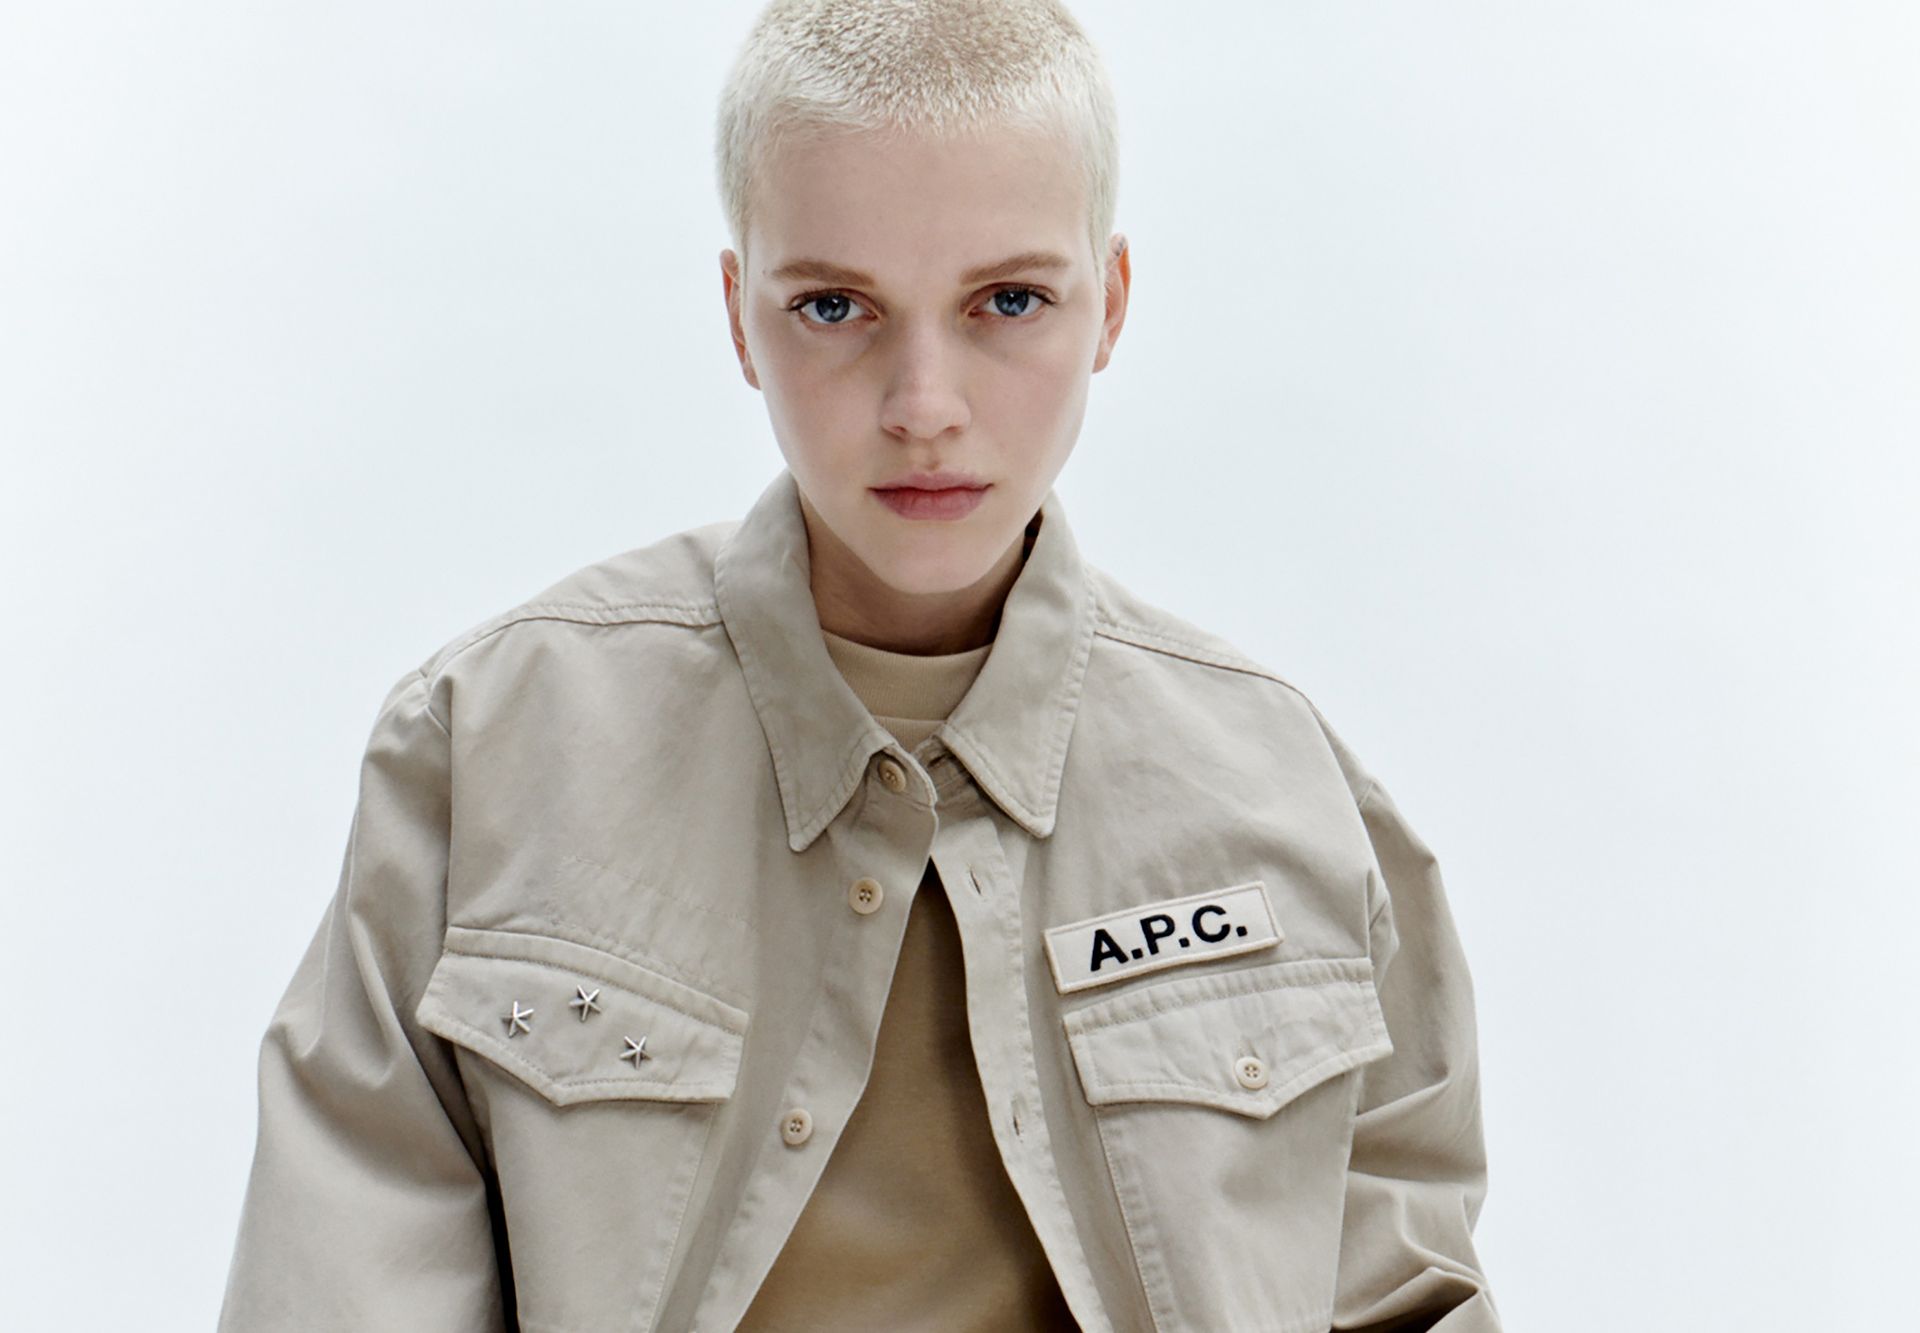 35 YEARS A.P.C.